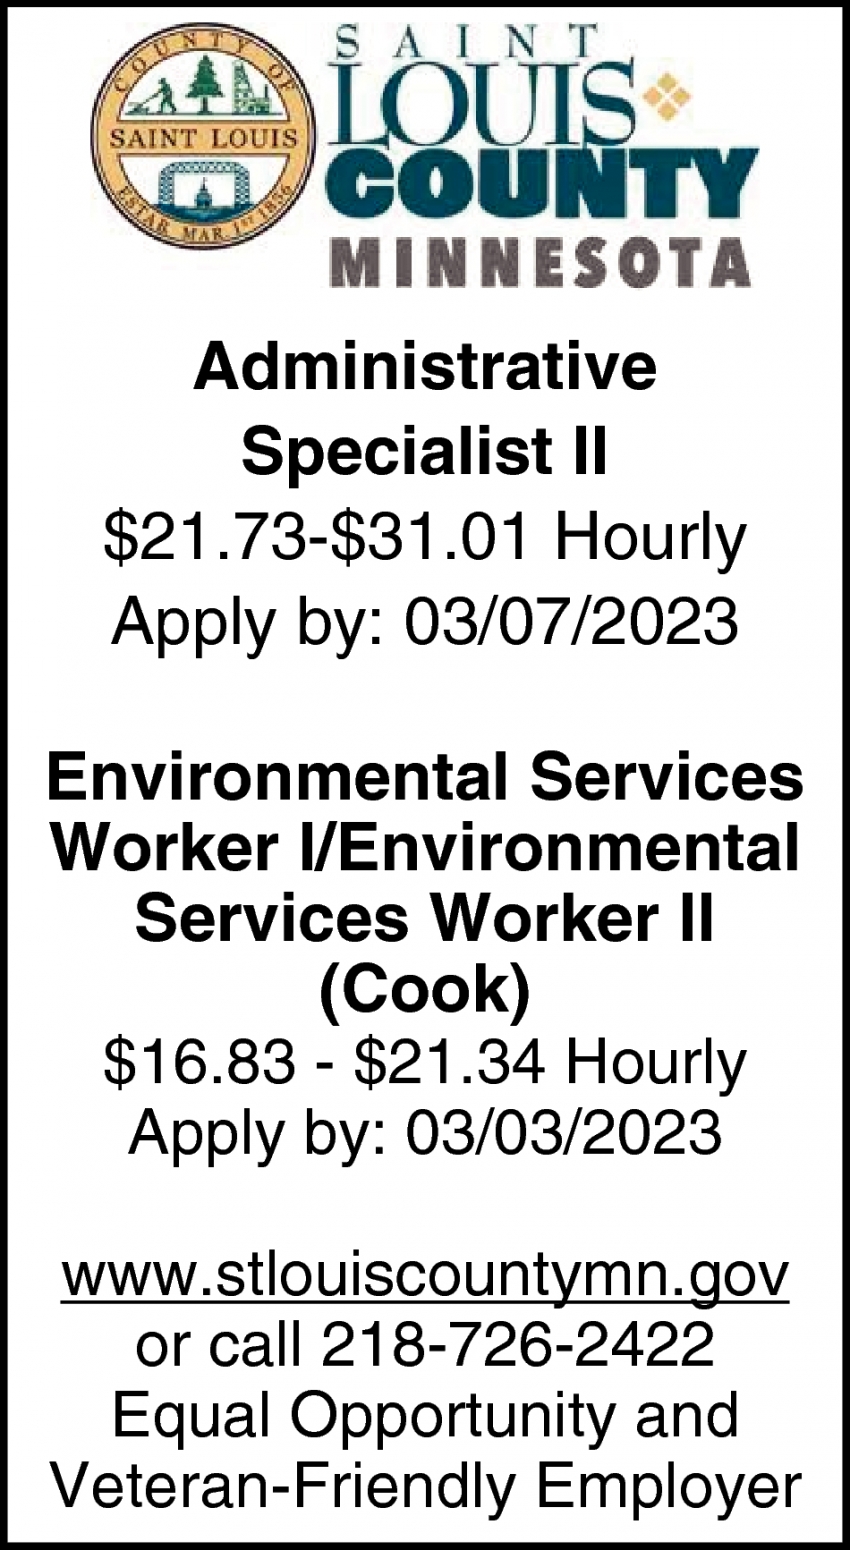 Administrative Specialist, Environmental Services Worker